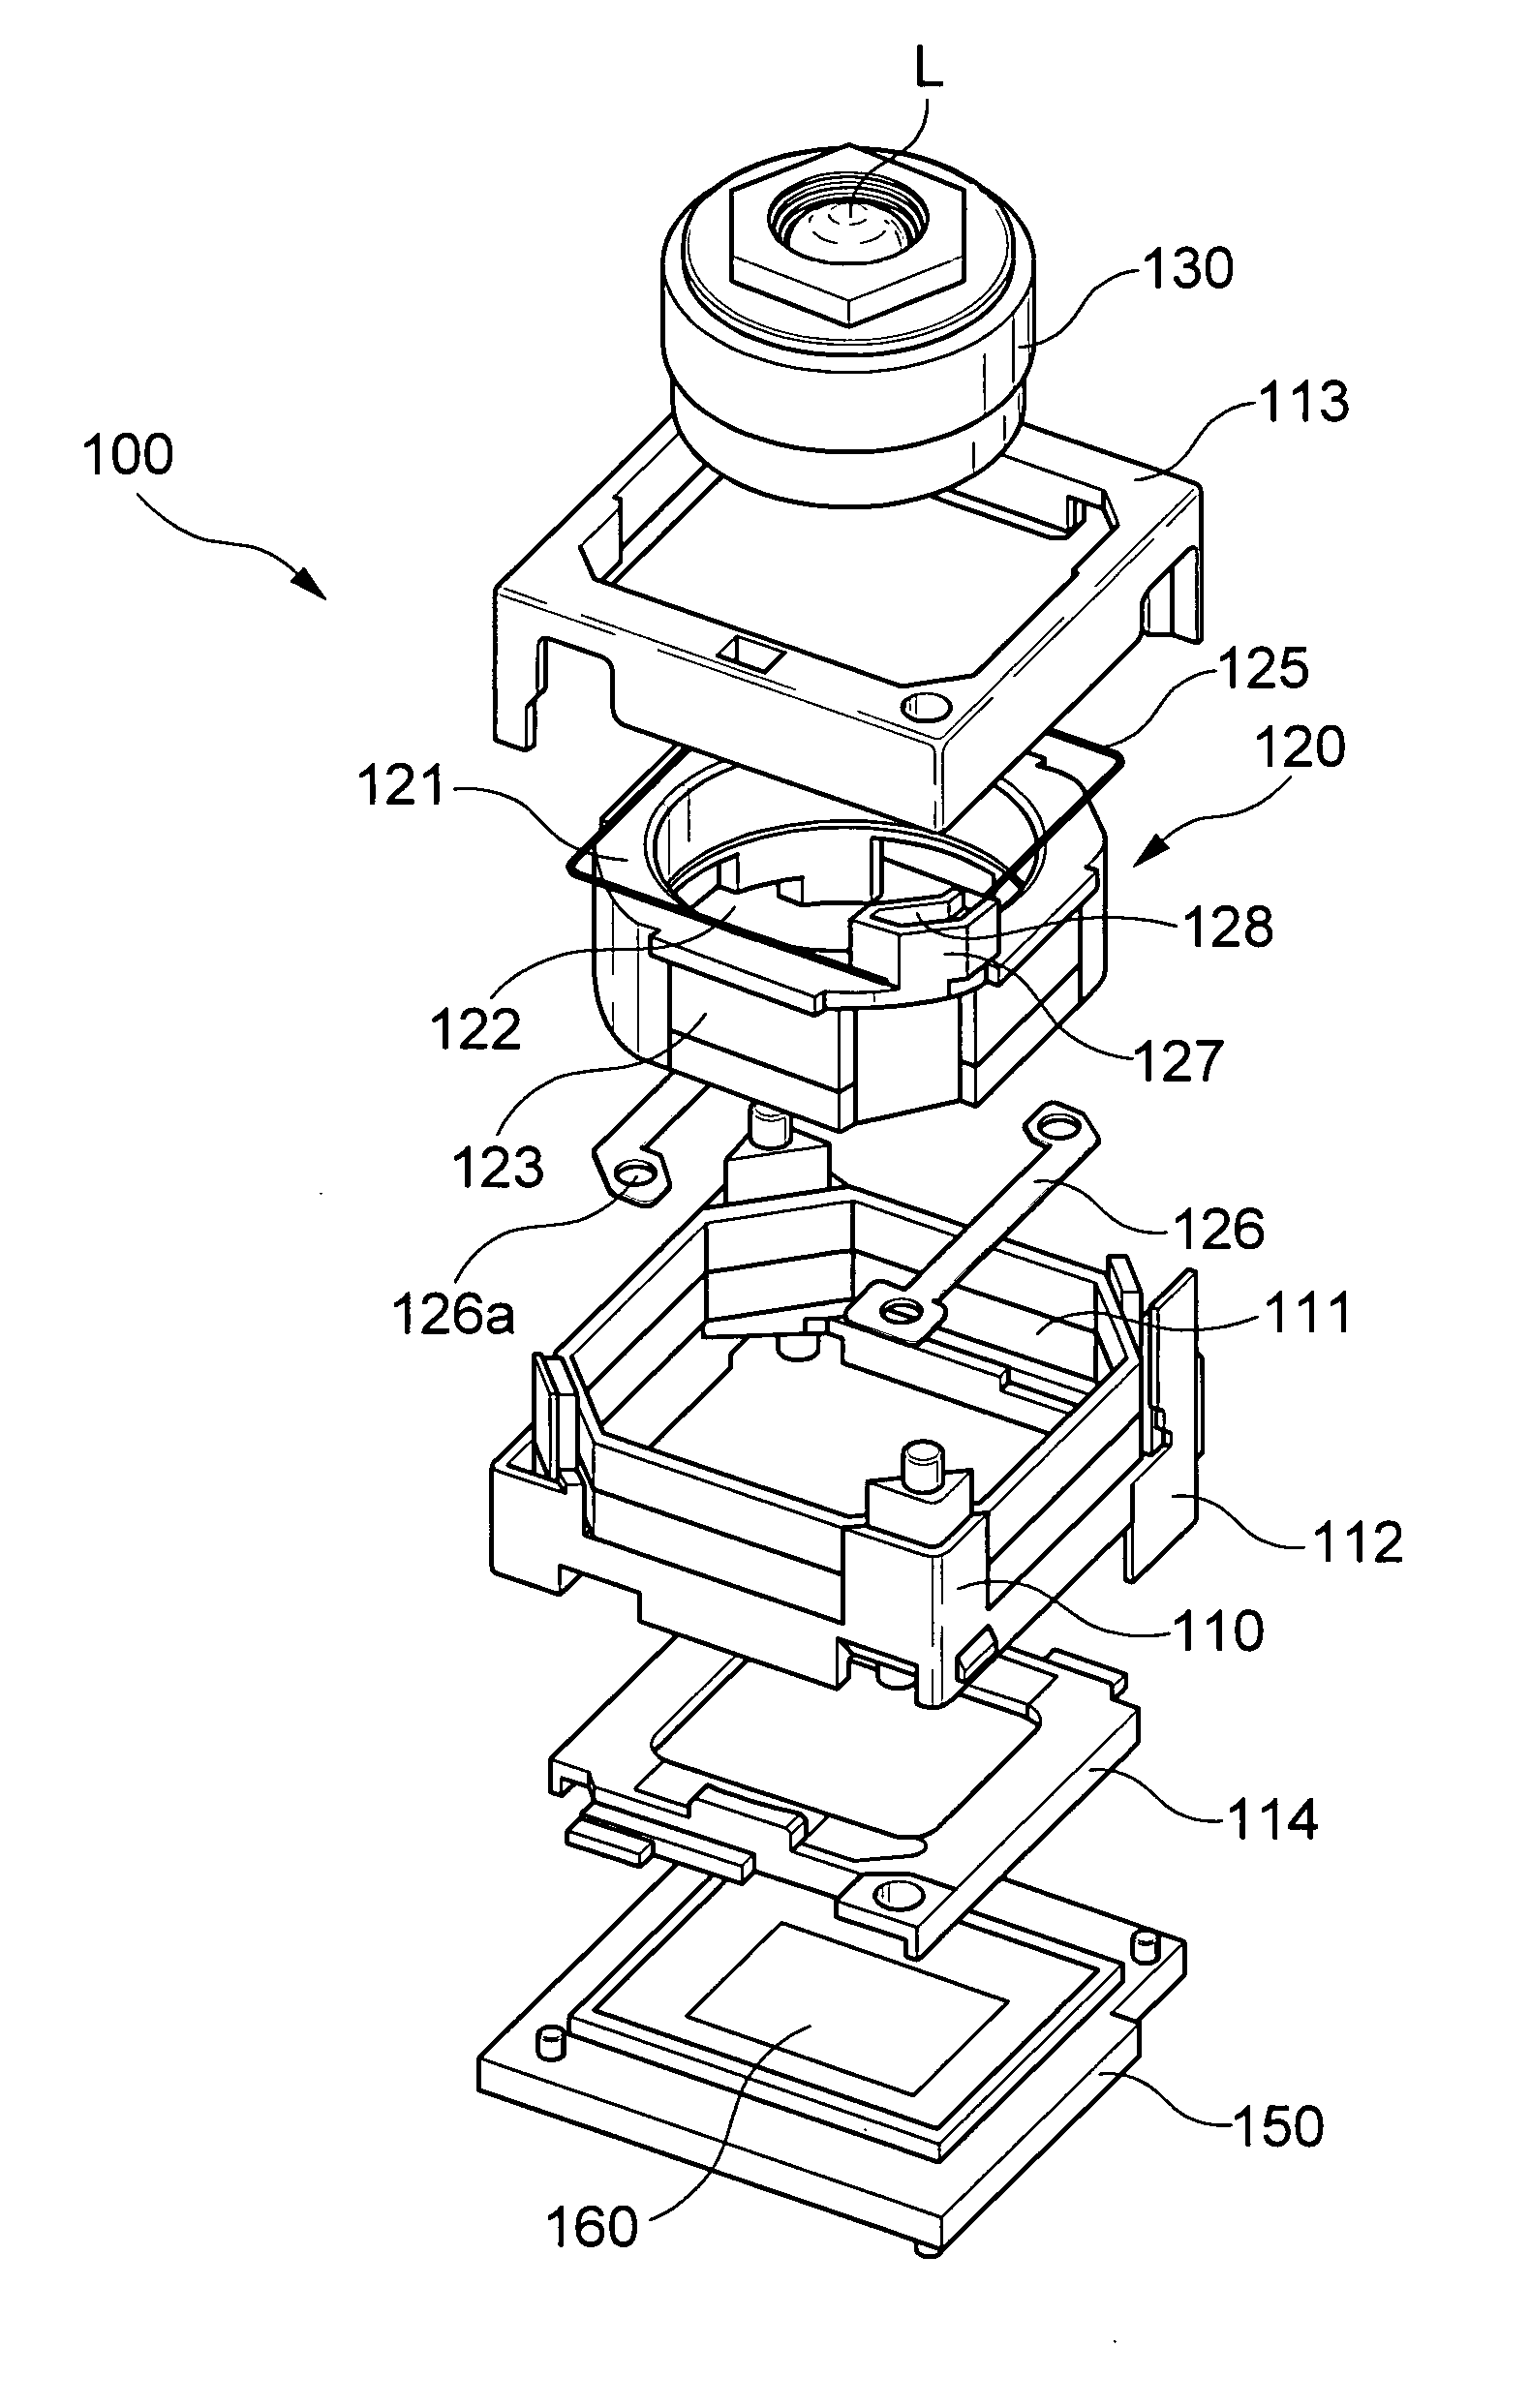 Actuator for mobile device